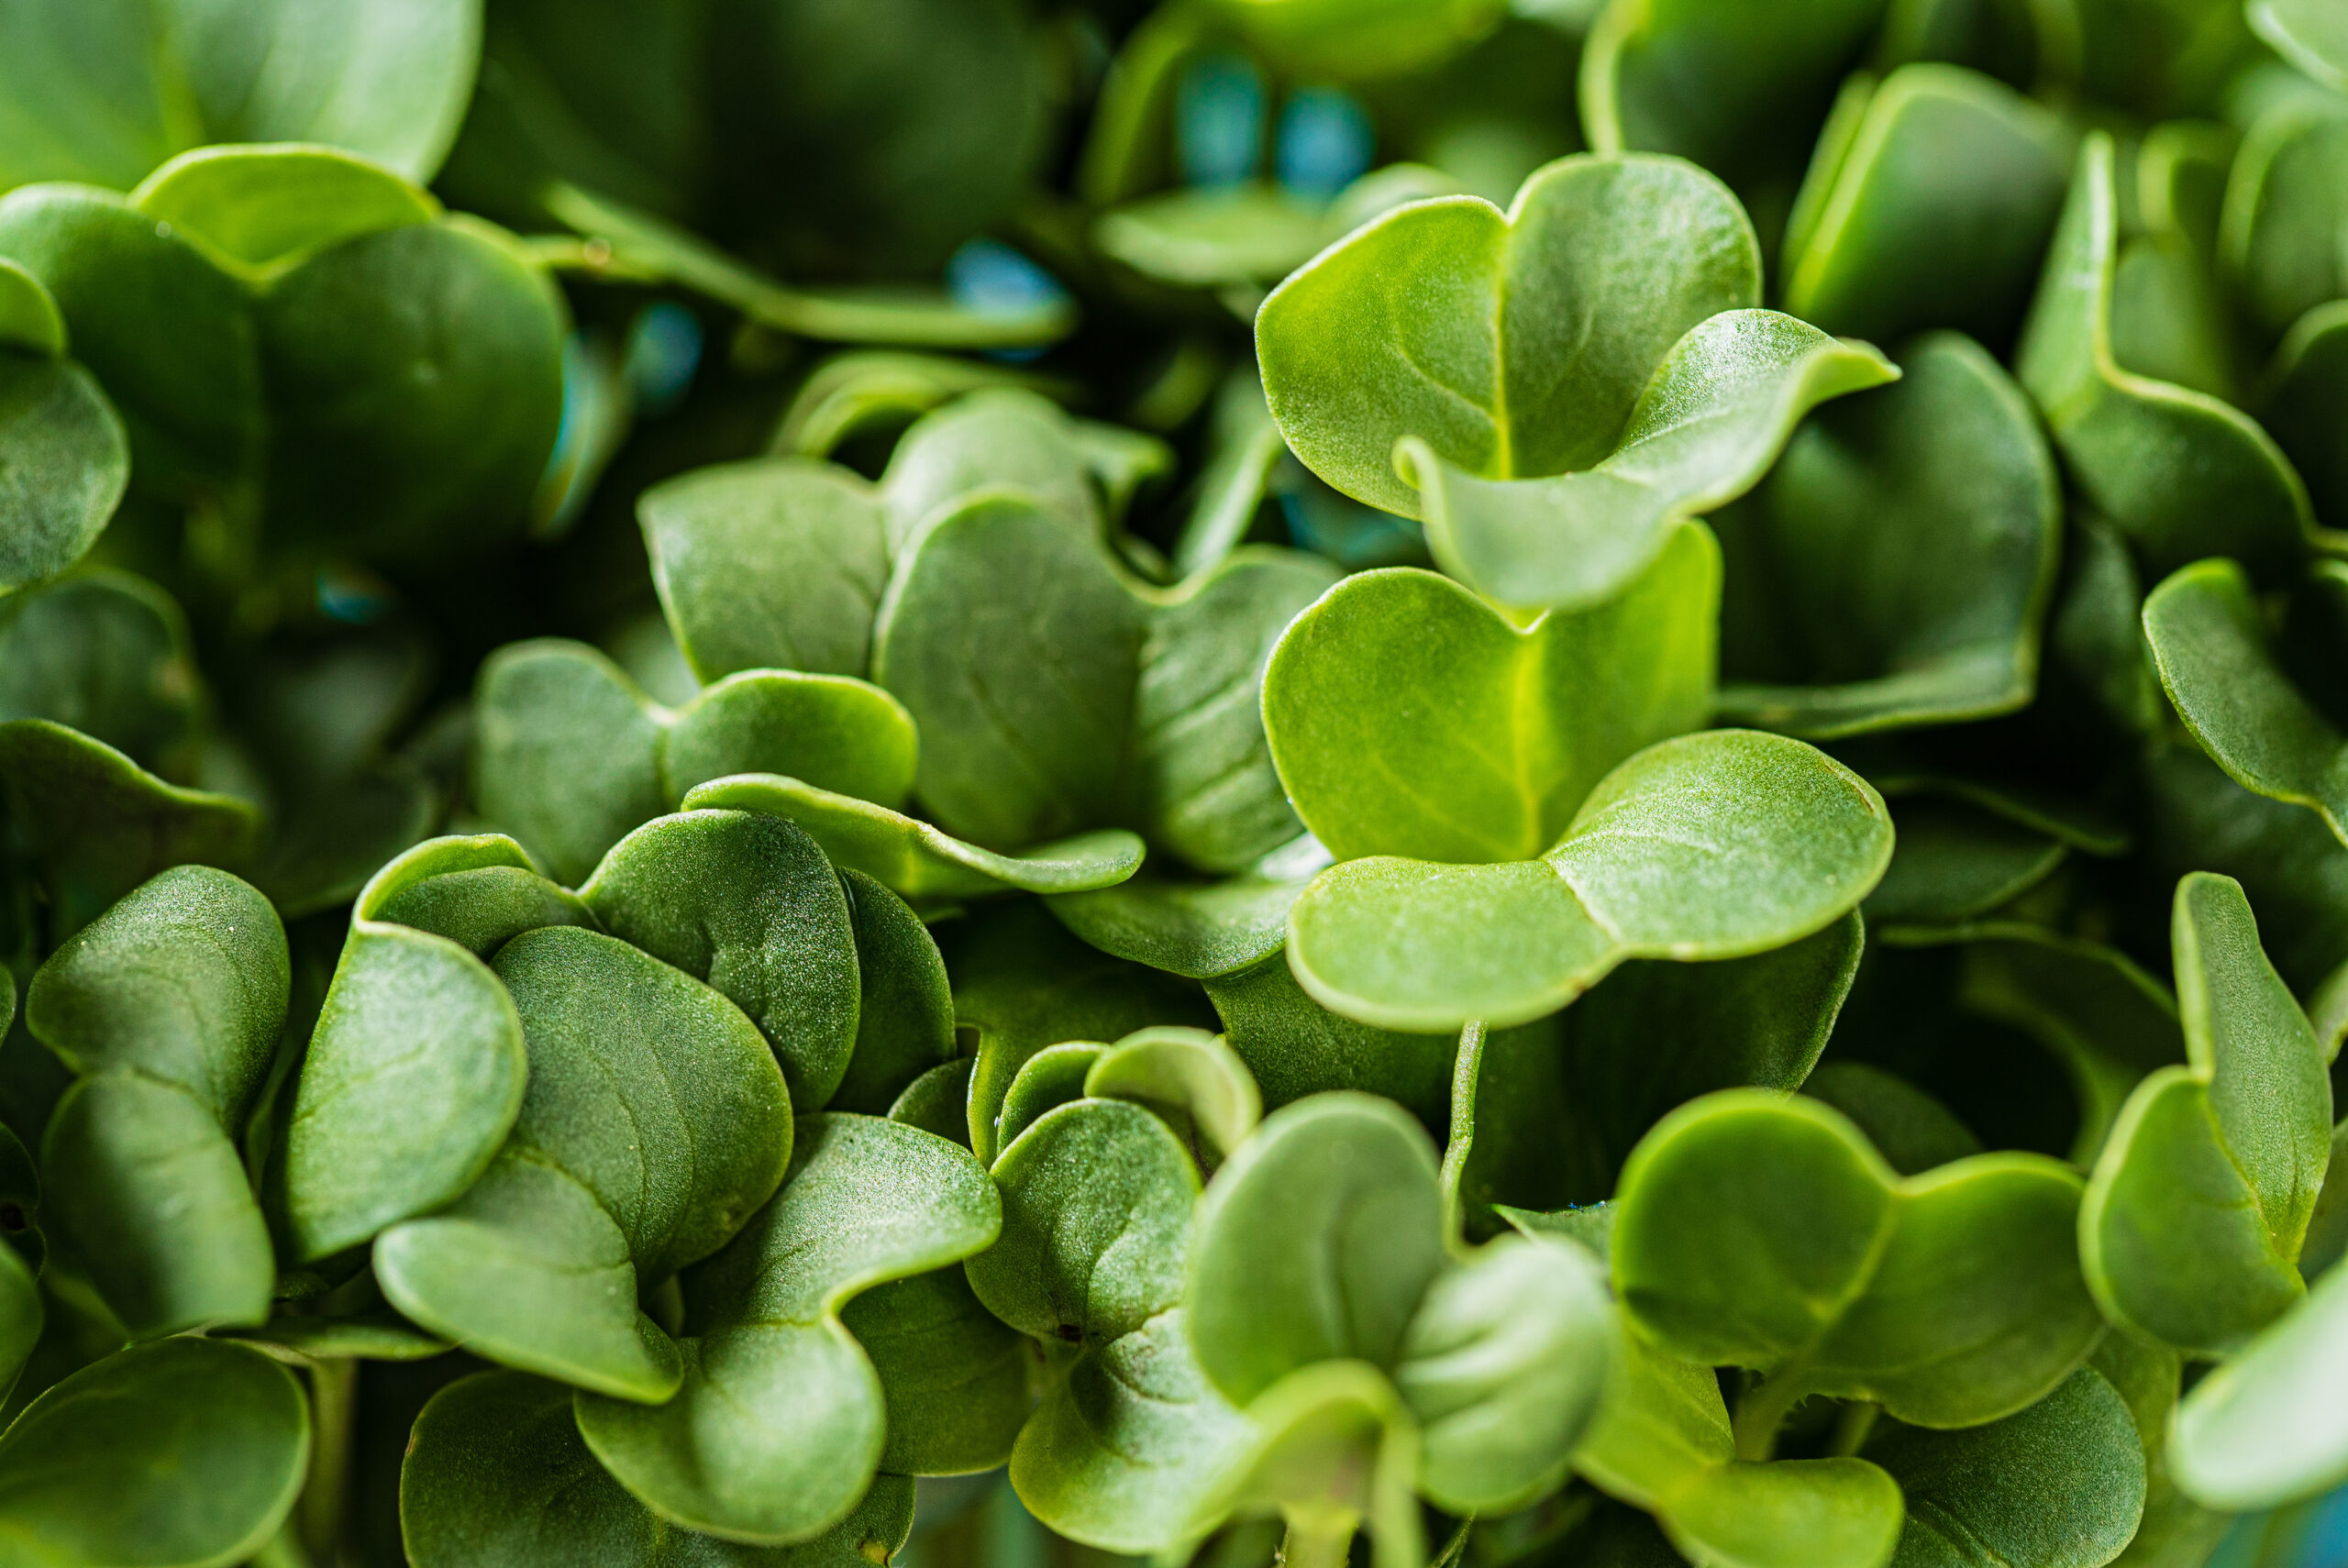 Sprouts and microgreens: crop potential and cultivation strategies